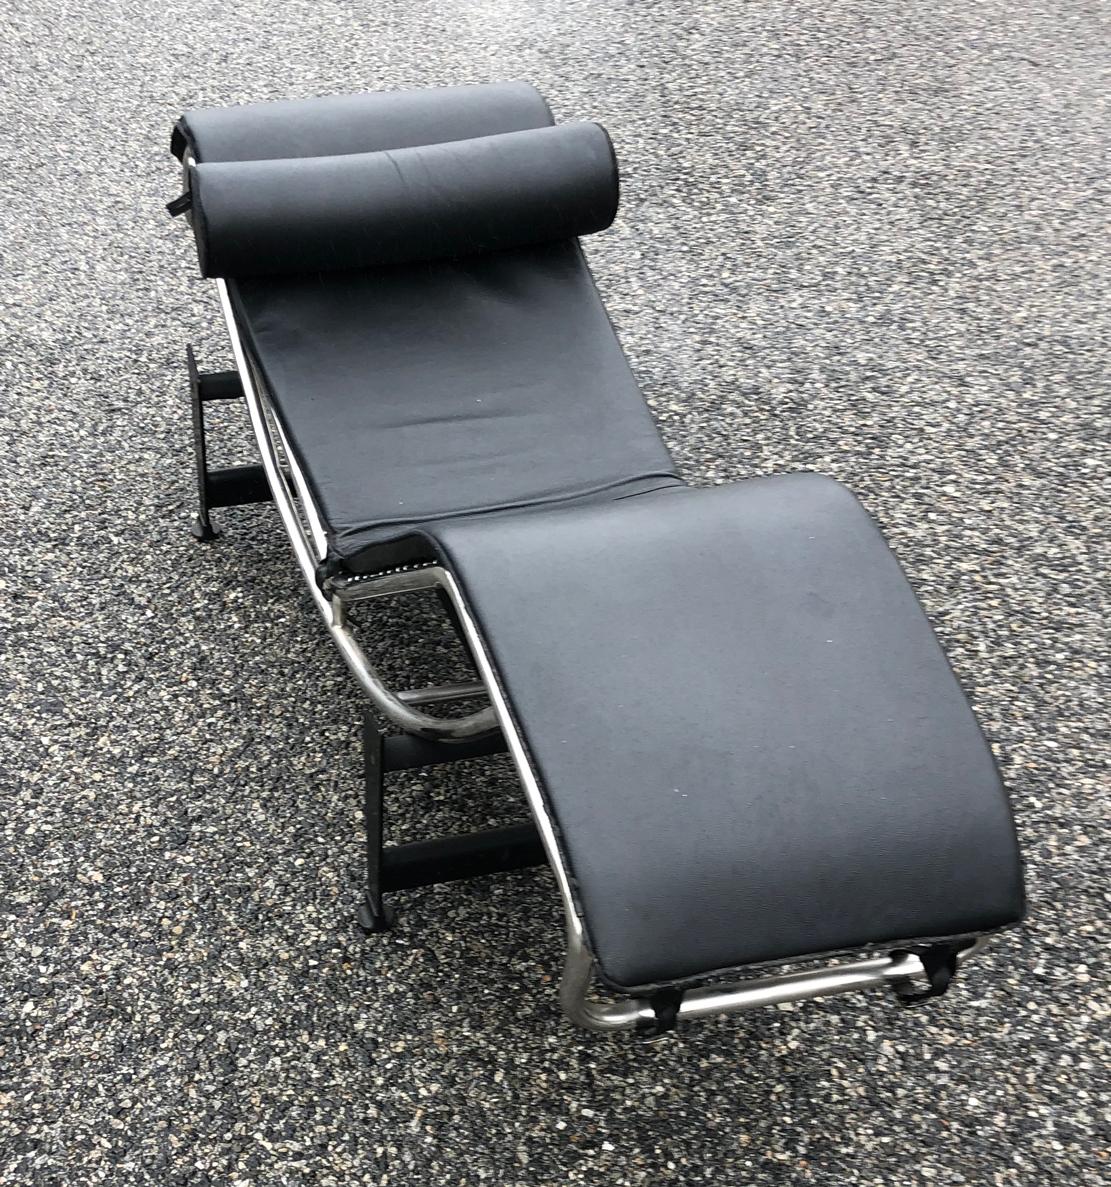 The “relaxing machine” — Designed to echo the natural curves of the human body in repose, the moveable frame of this iconic chaise adjusts along the base, following your every move from upright sitting to full recline. Known as the “relaxing